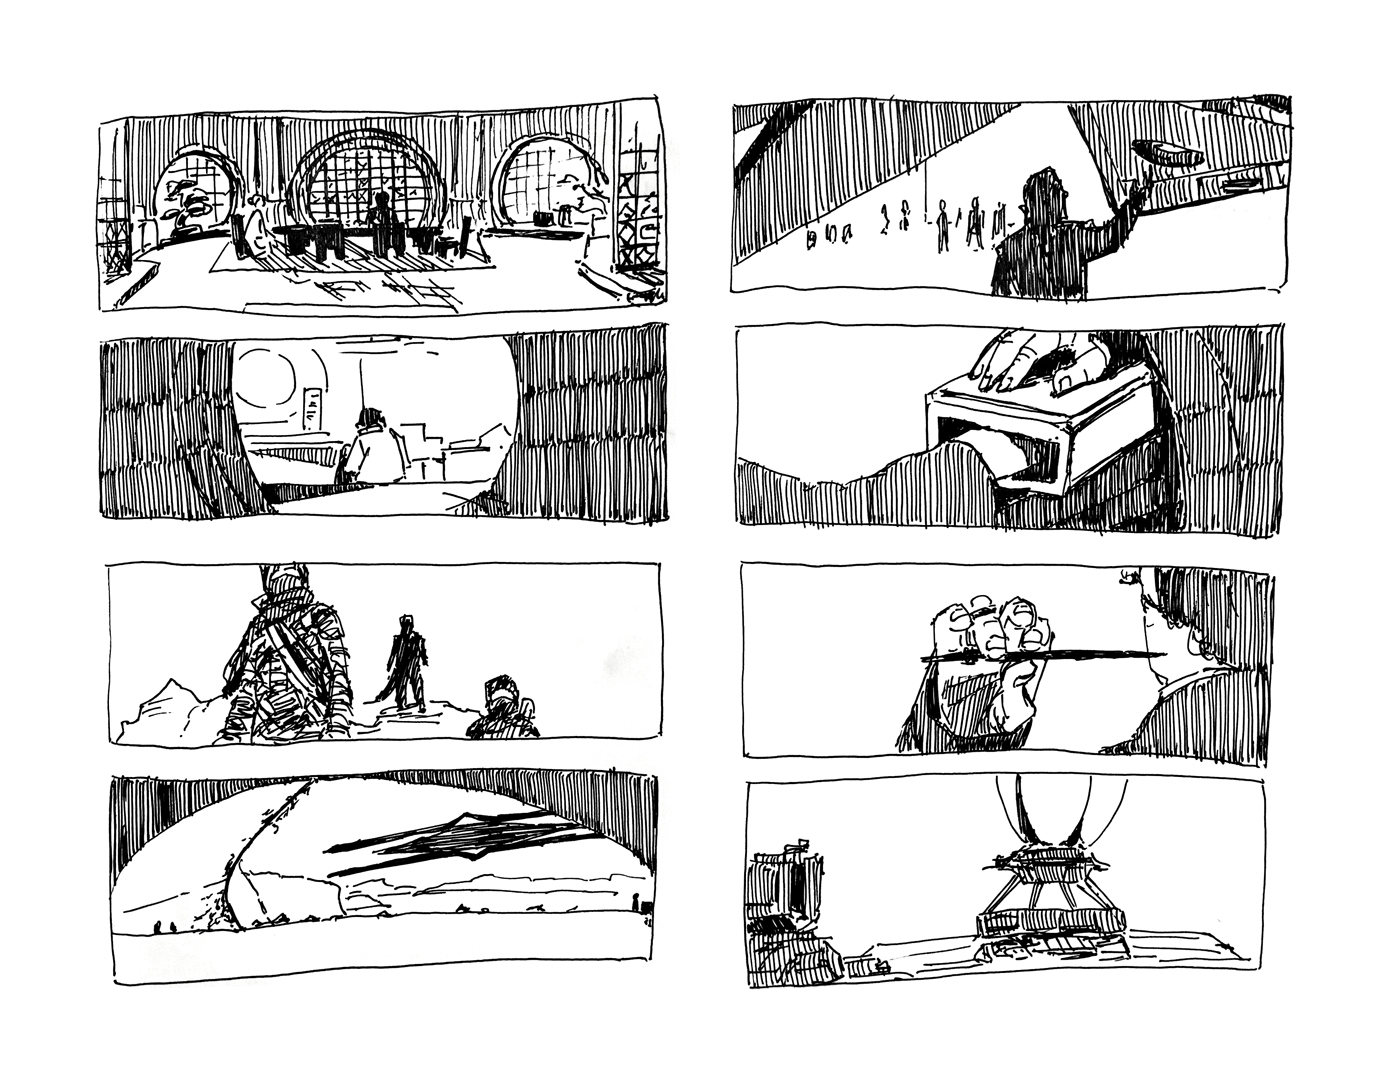 Various frames from Dune drawn in ink.